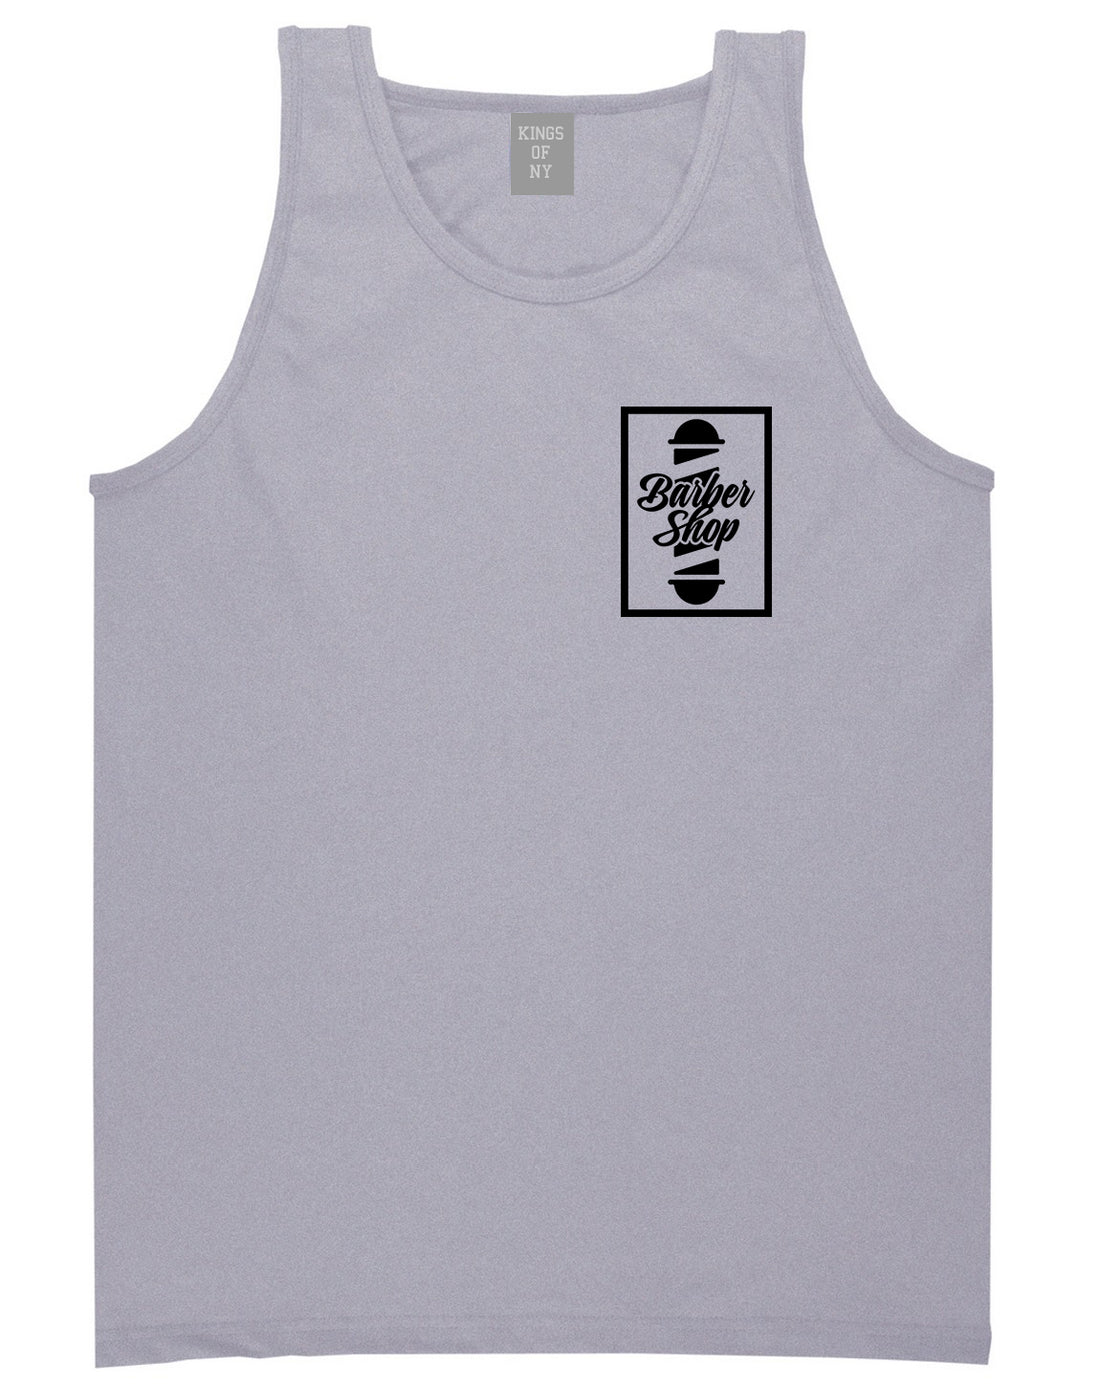 Barbershop Pole Chest Grey Tank Top Shirt by Kings Of NY